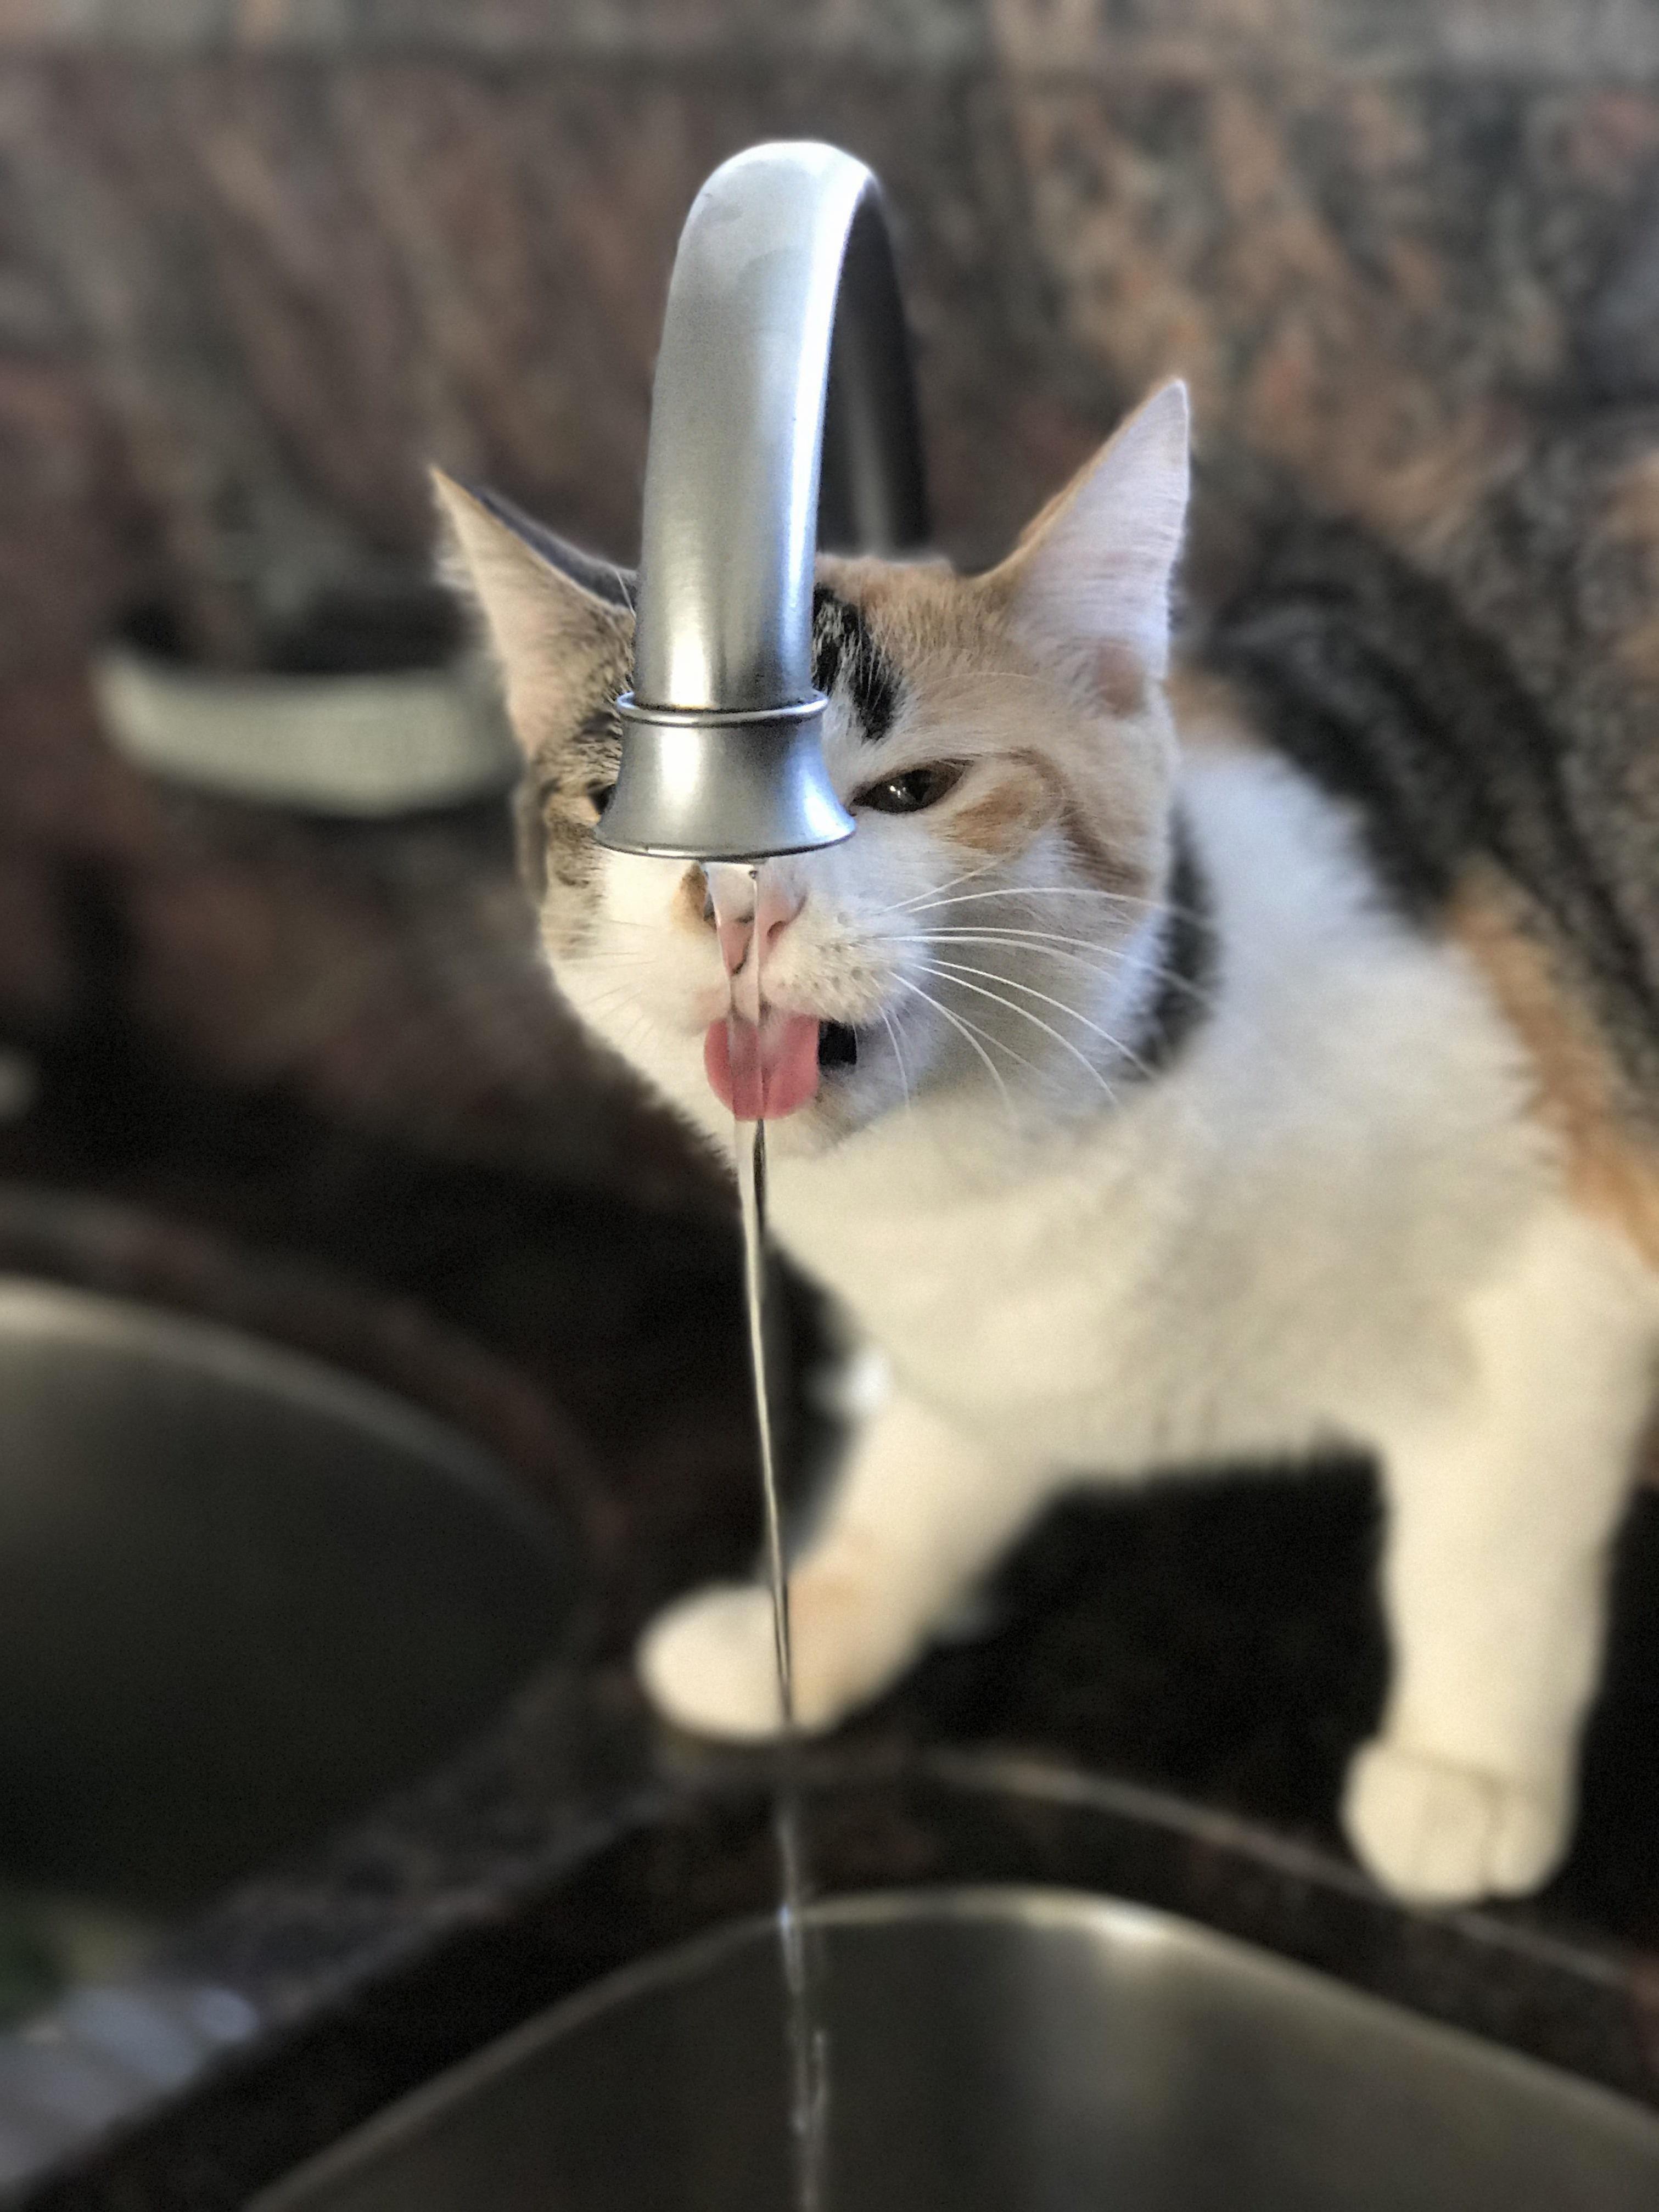 This is my kitty stella who only drinks out of sinks